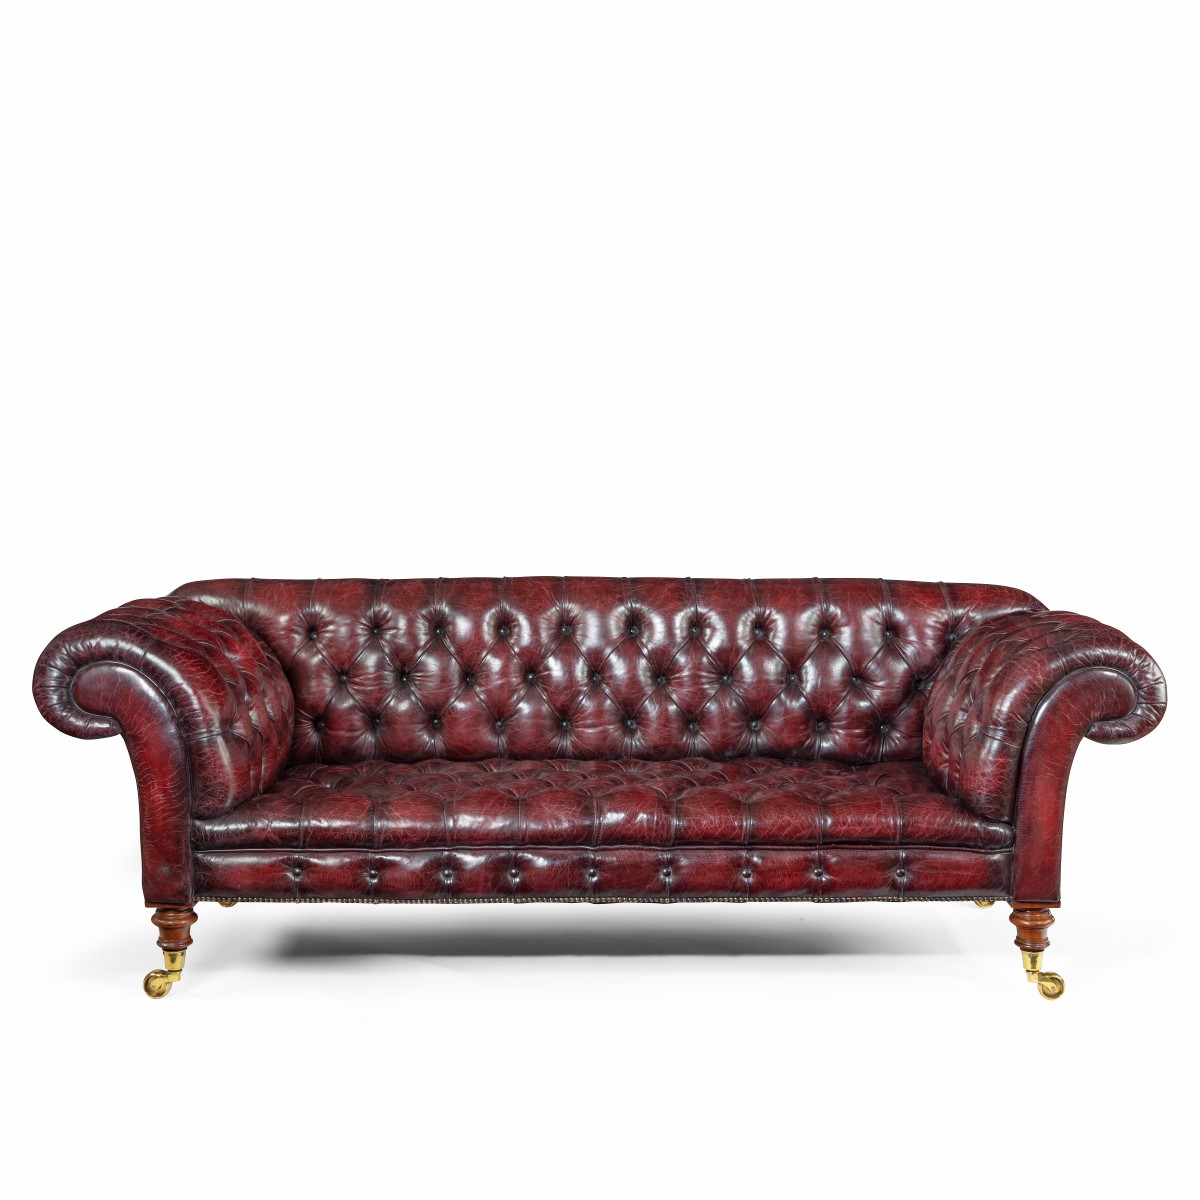 A Victorian deep buttoned Chesterfield settee, with an upright back and scroll arms, set on four turned walnut legs with brass castors, reupholstered in distressed burgundy leather